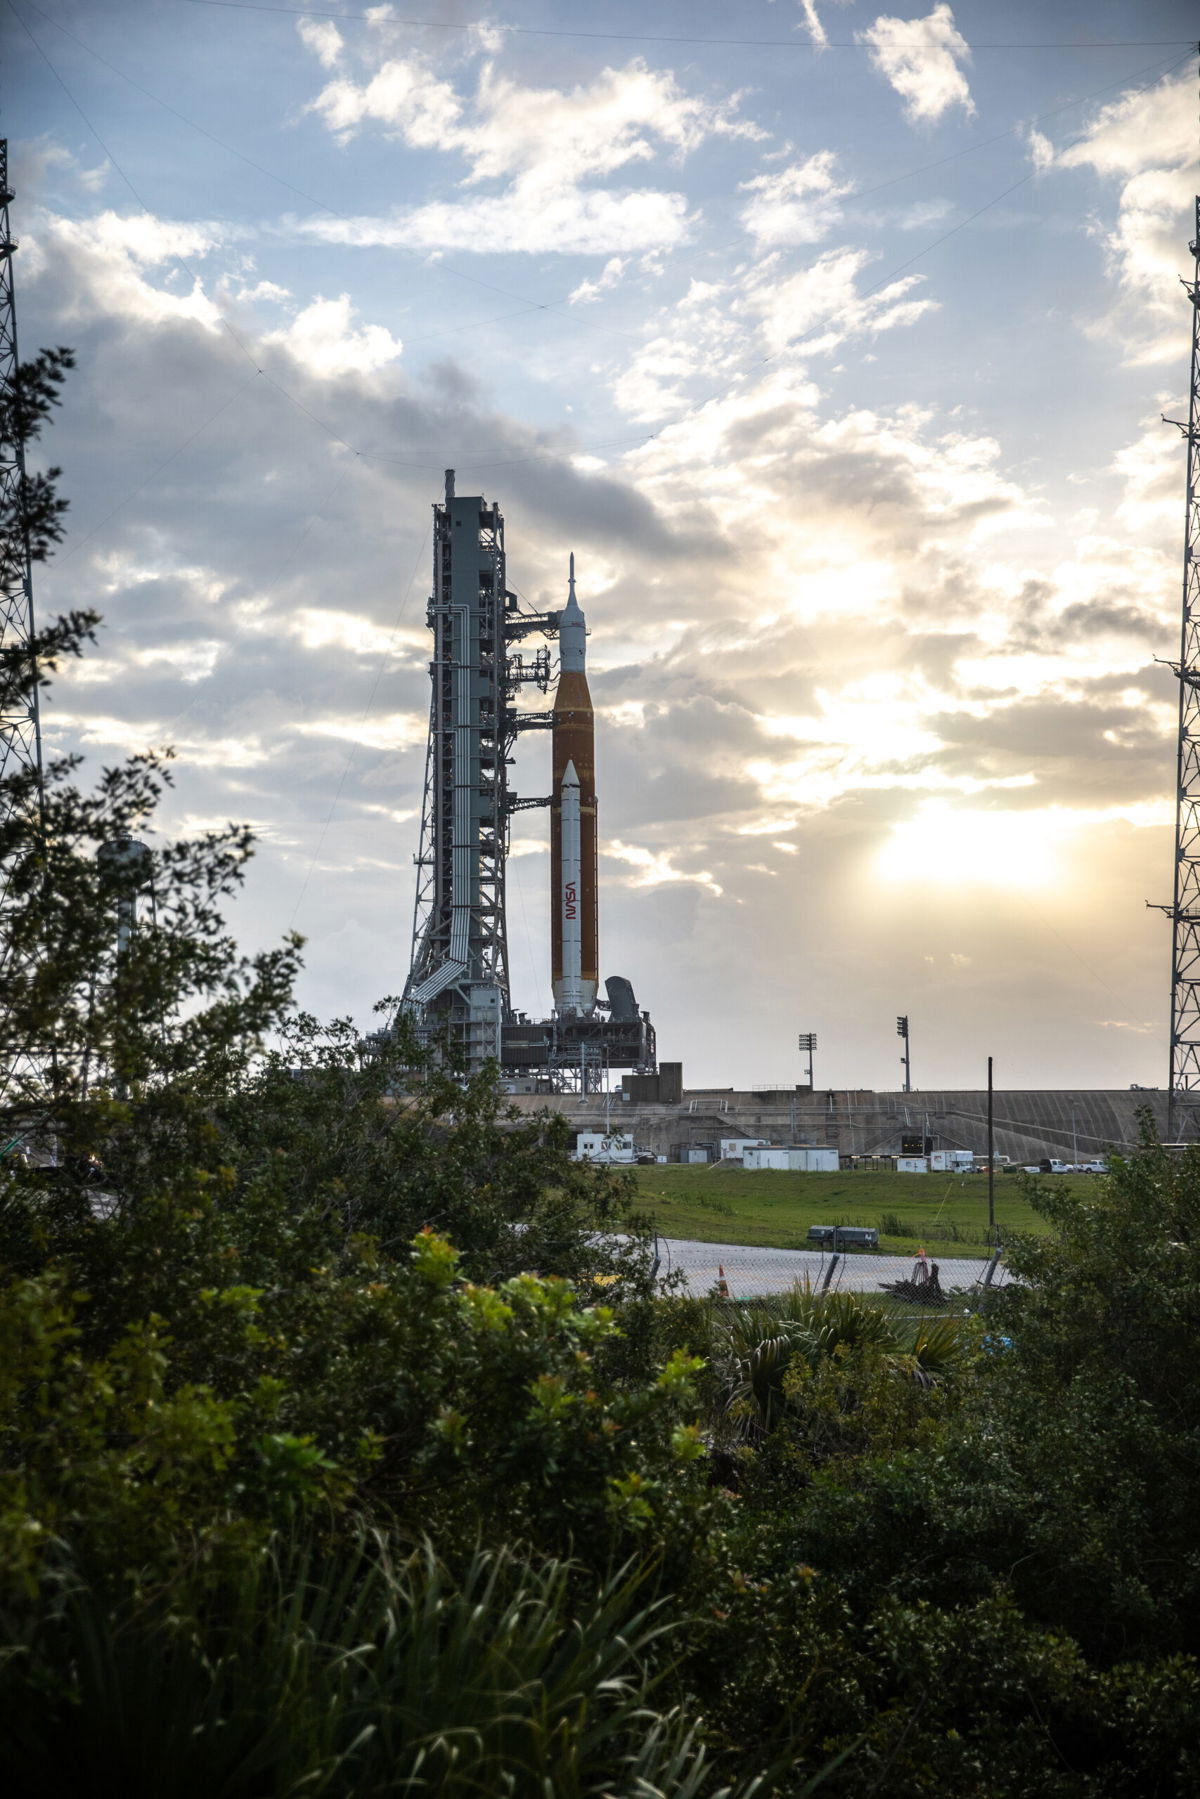 <i>Ben Smegelsky/NASA</i><br/>The Artemis I mega moon rocket is ready for its fourth attempt at a final prelaunch test